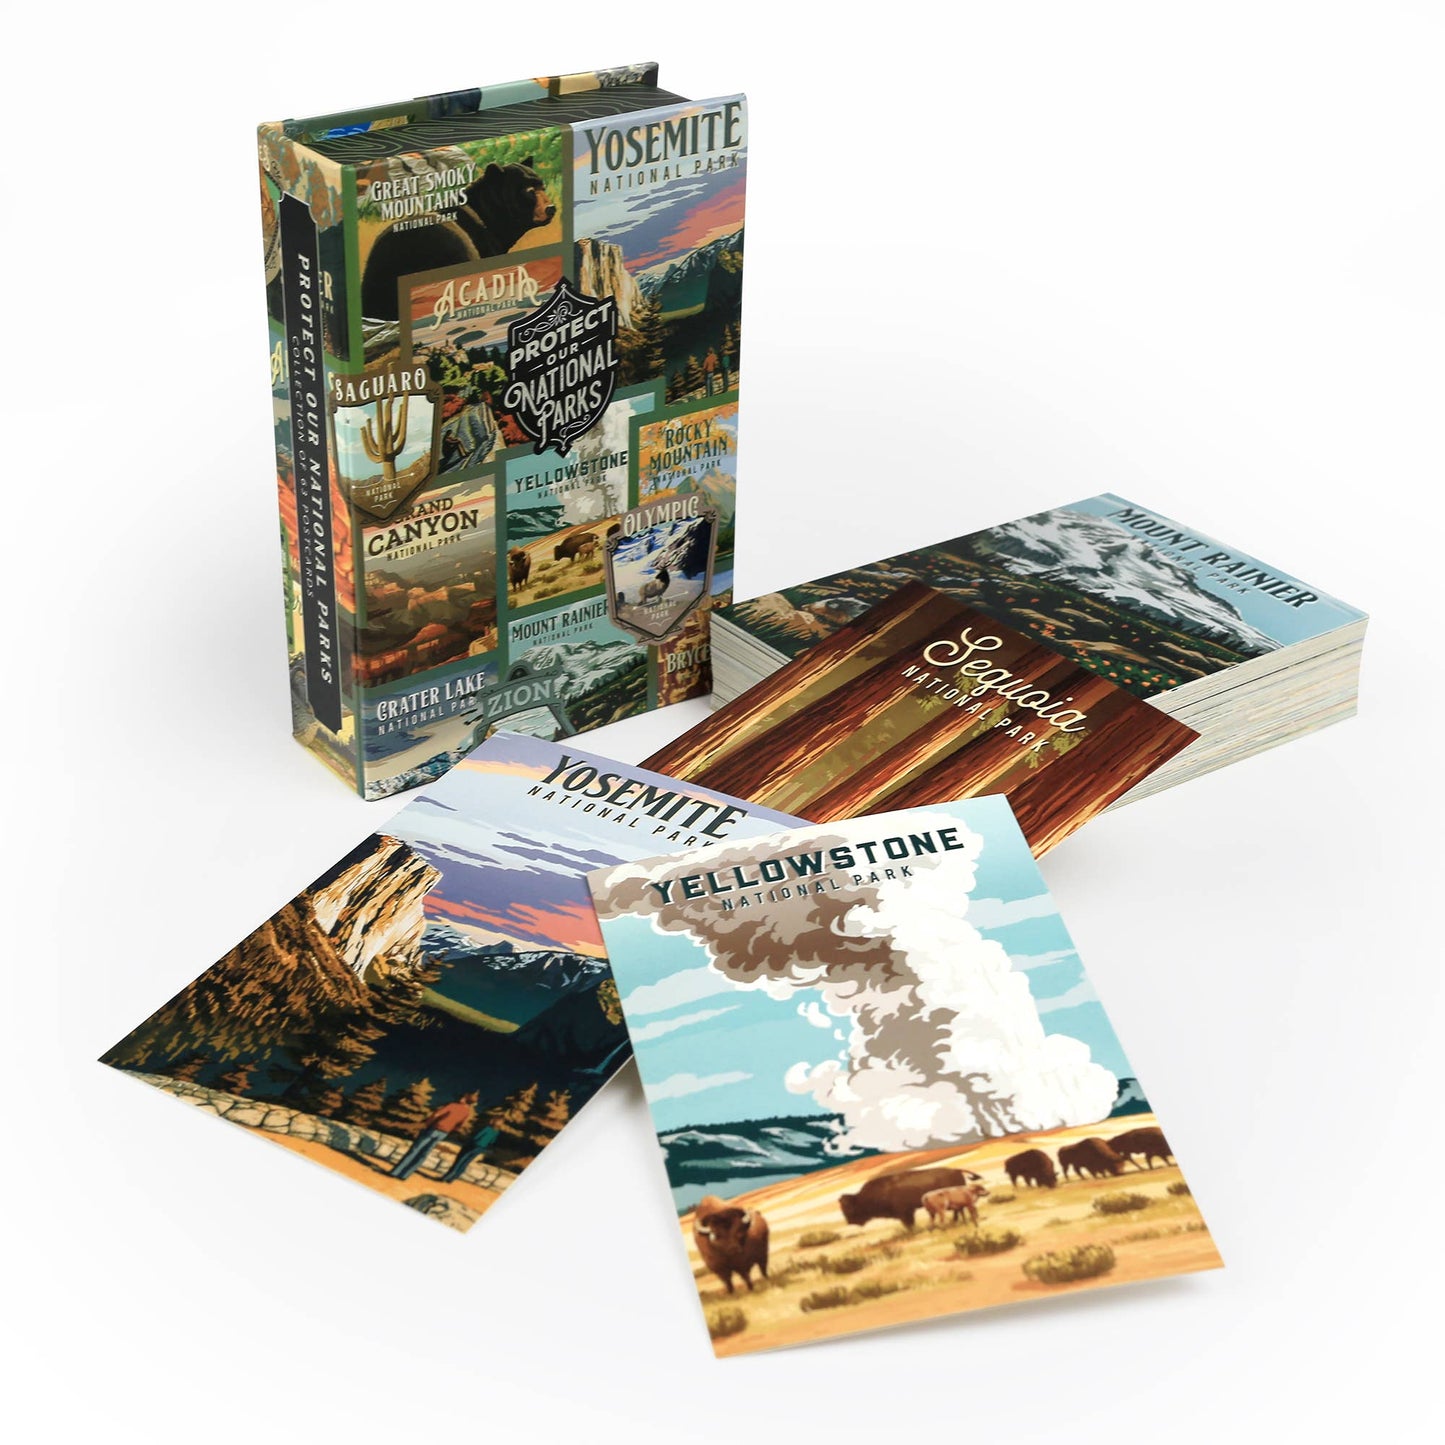 Protect Our National Parks Postcard Box Set